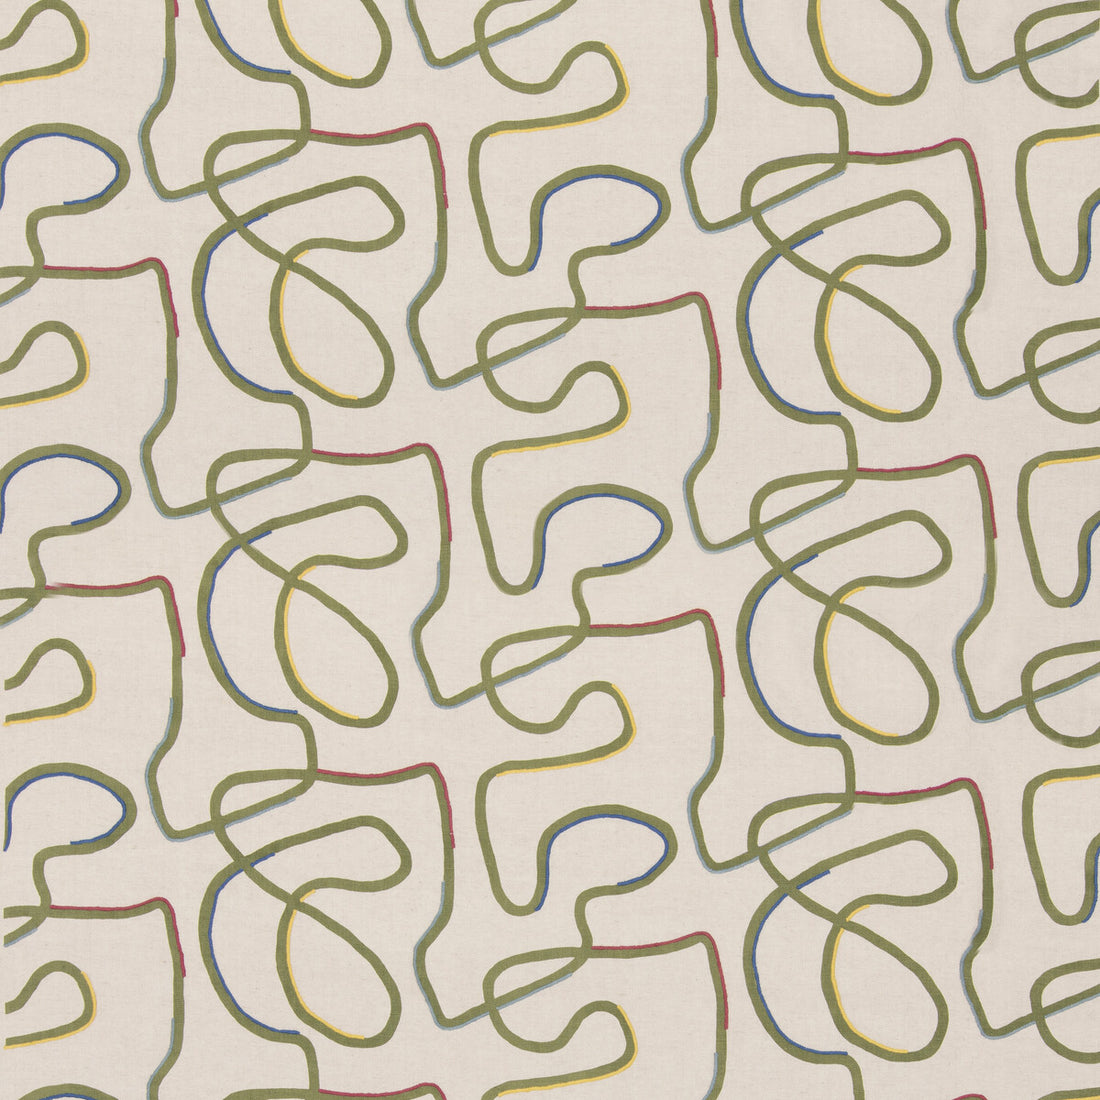 Ring Road fabric in sage color - pattern BP11054.2.0 - by G P &amp; J Baker in the X Kit Kemp Prints And Embroideries collection